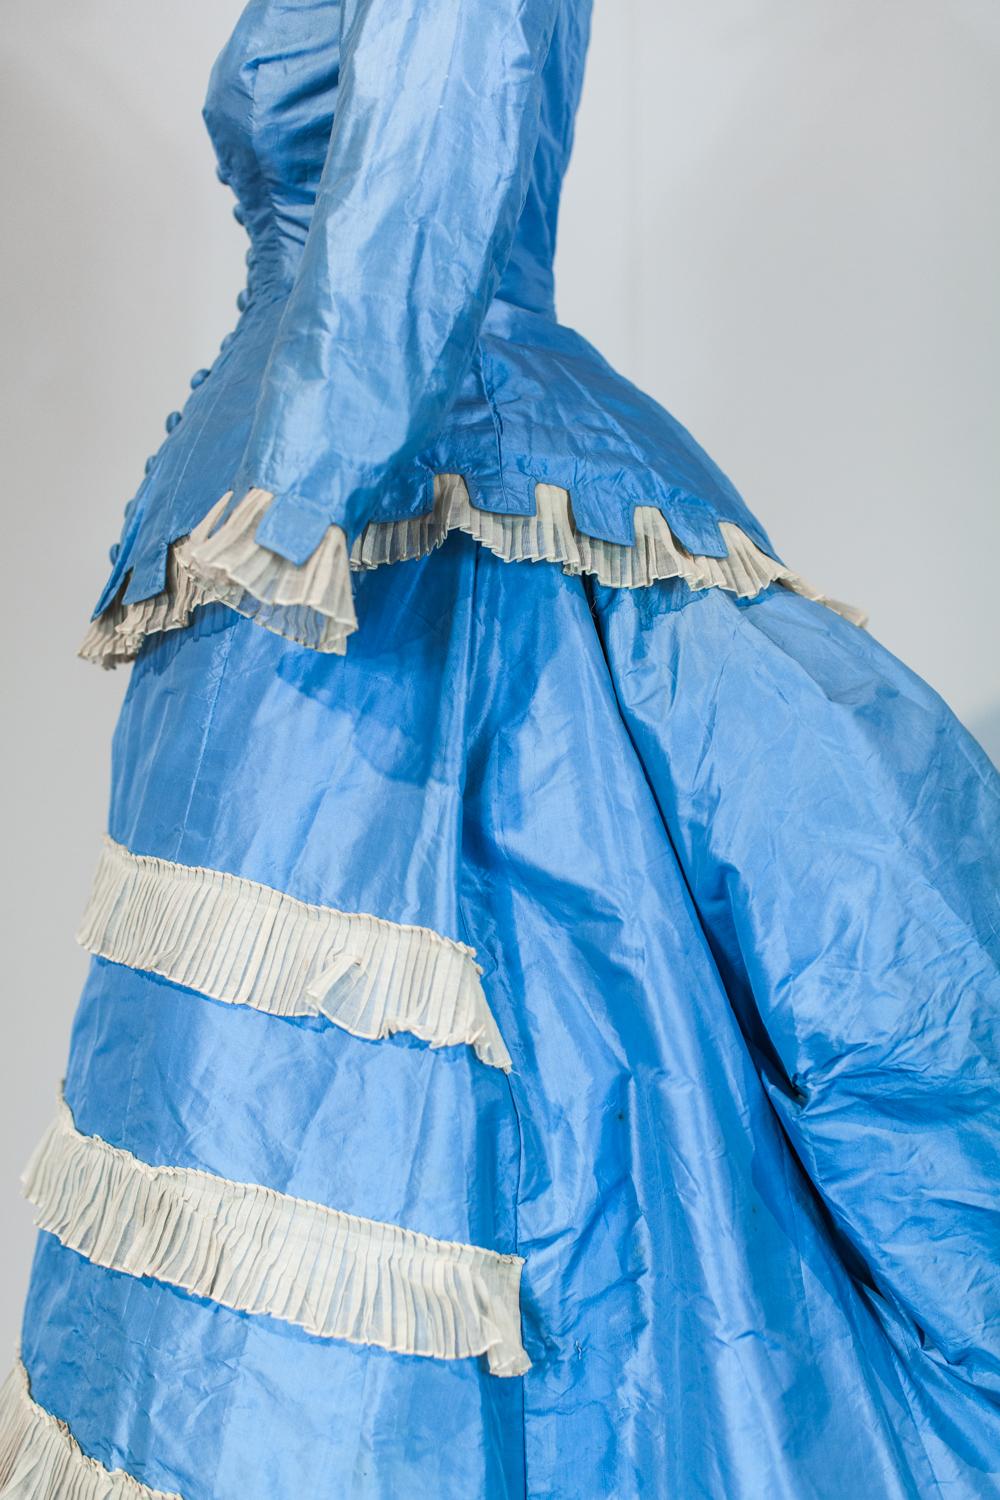 Circa 1870/1875
France.

Day dress with  princess, two-part bodice and skirt on a bustle cage. Sky-blue taffeta decorated with starched cream gauze called tarlatane, finely wrinkled and crenellated à la grecque. Boned bodice with long basque closing